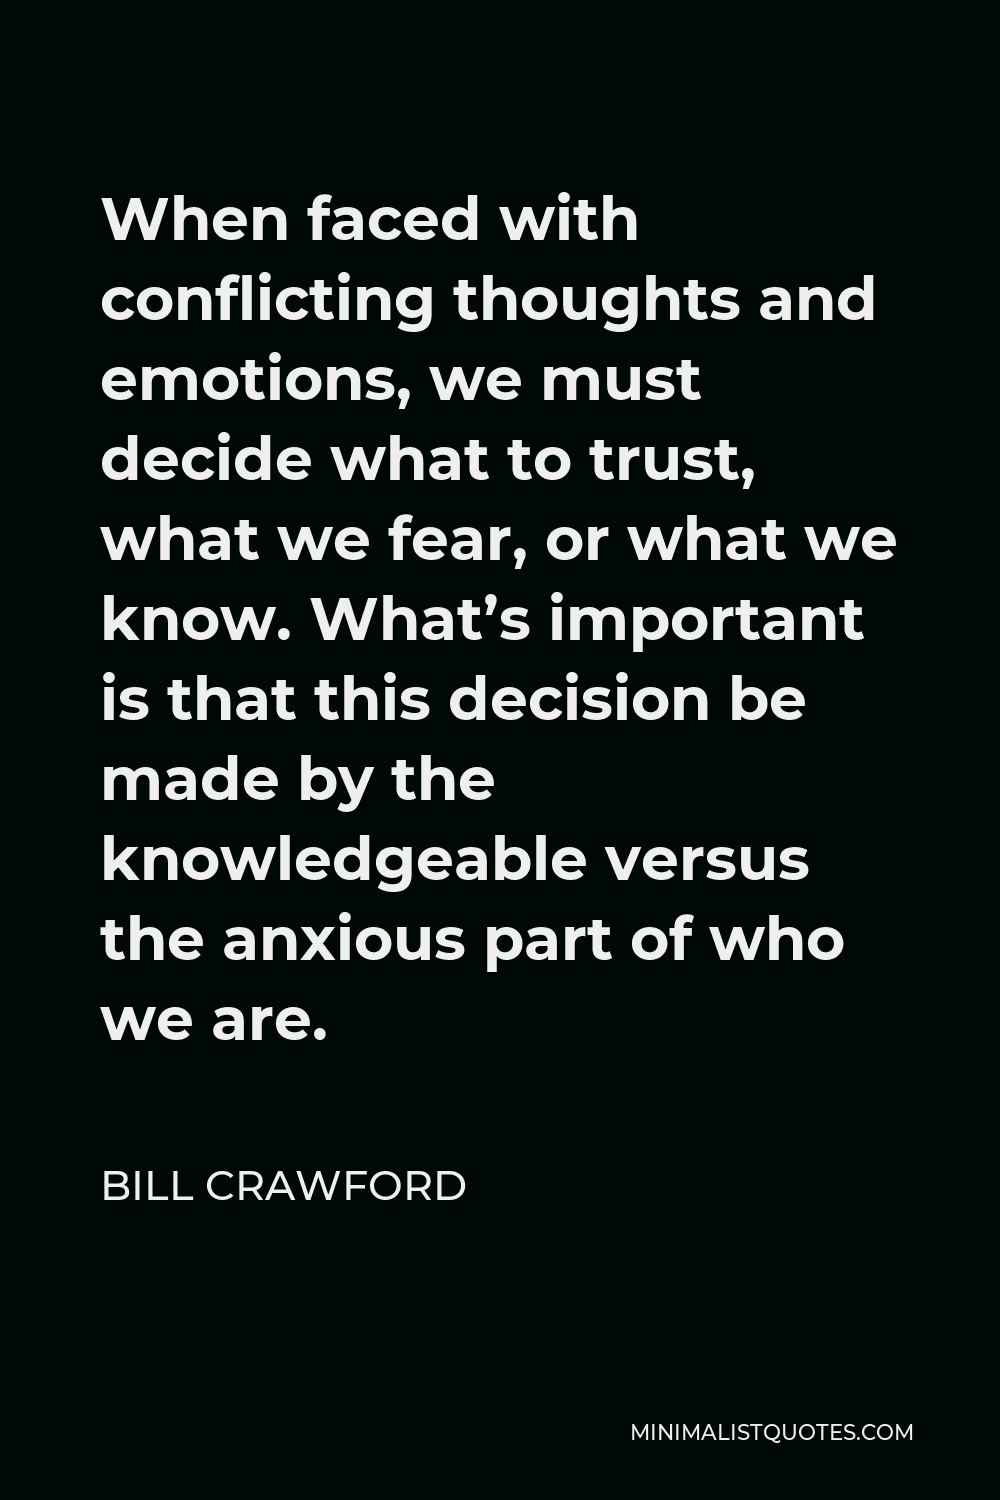 Bill Crawford Quote - When faced with conflicting thoughts and emotions, we must decide what to trust, what we fear, or what we know. What’s important is that this decision be made by the knowledgeable versus the anxious part of who we are.